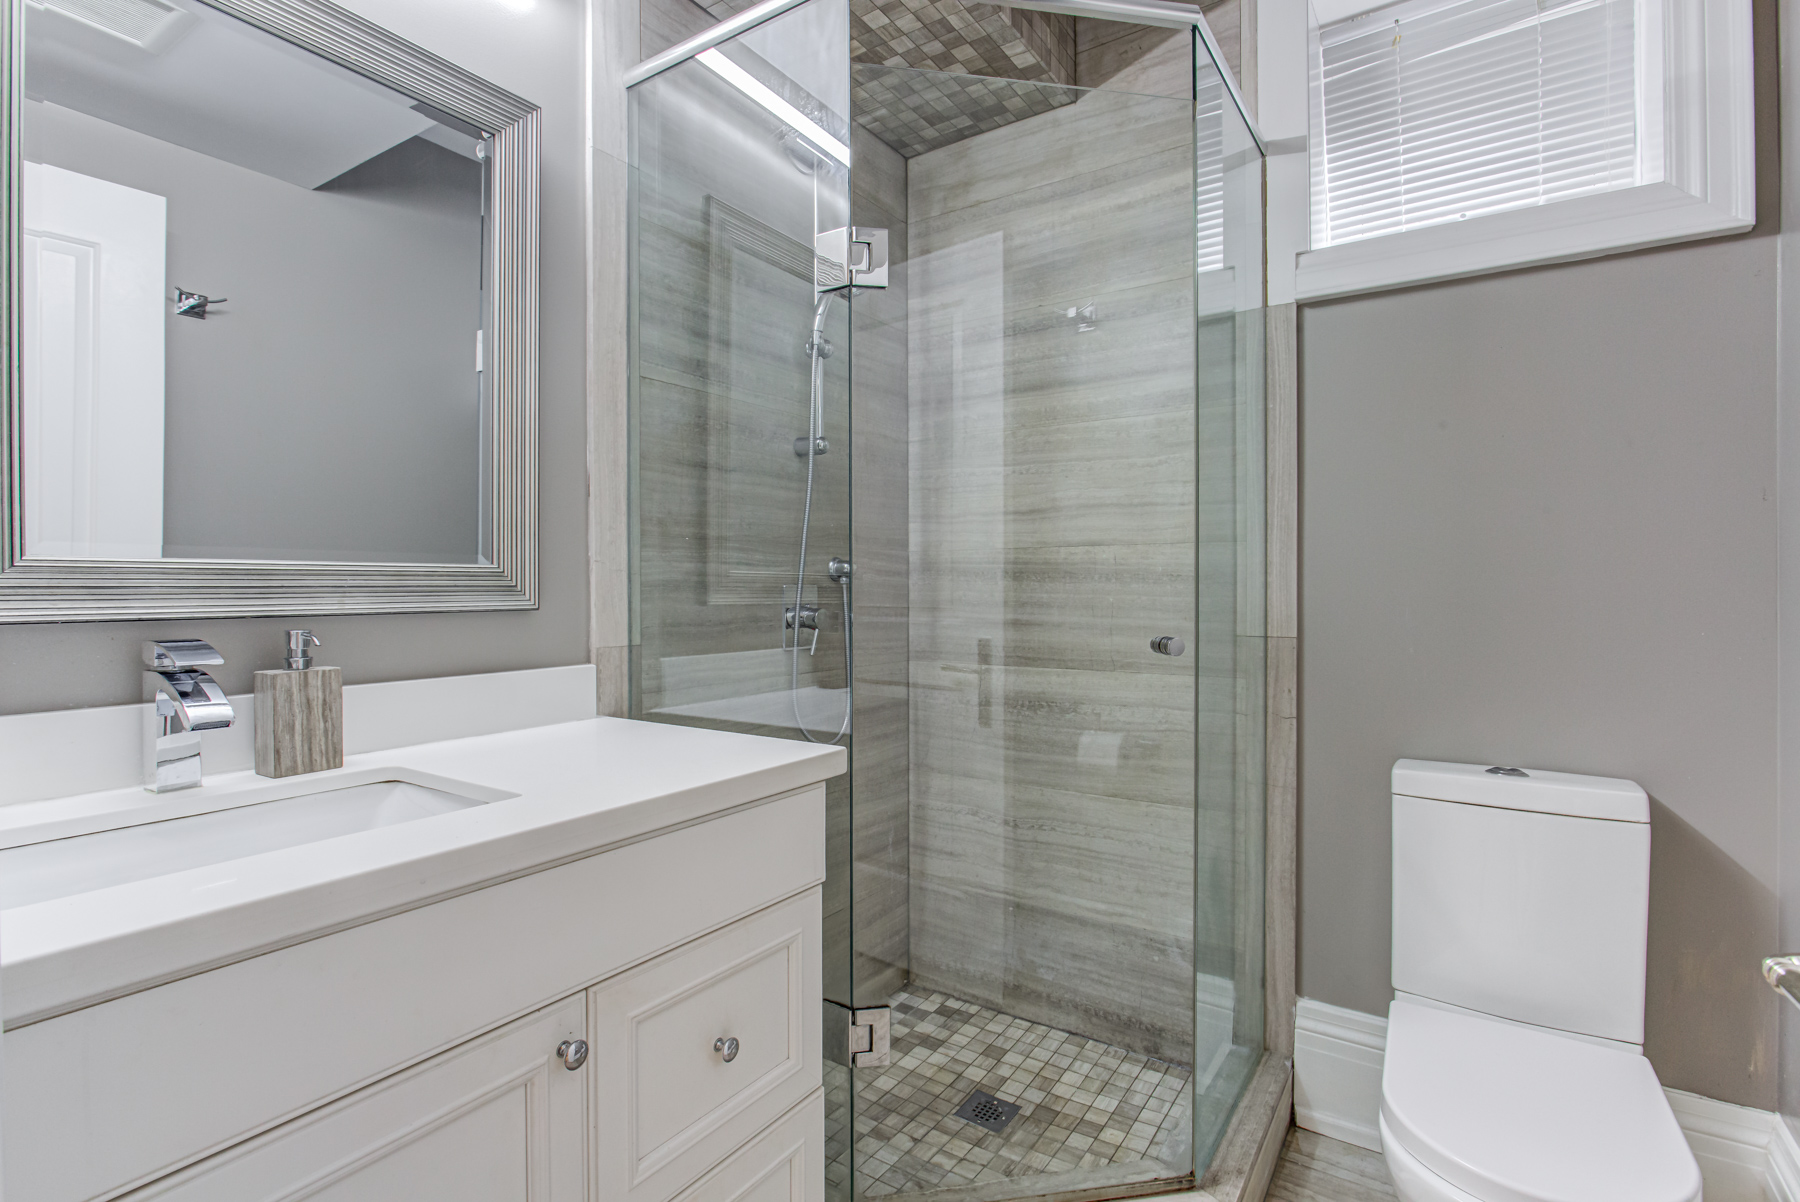 741 Glencairn Ave basement shower with quartz counters, marble tiles and glass shower doors.